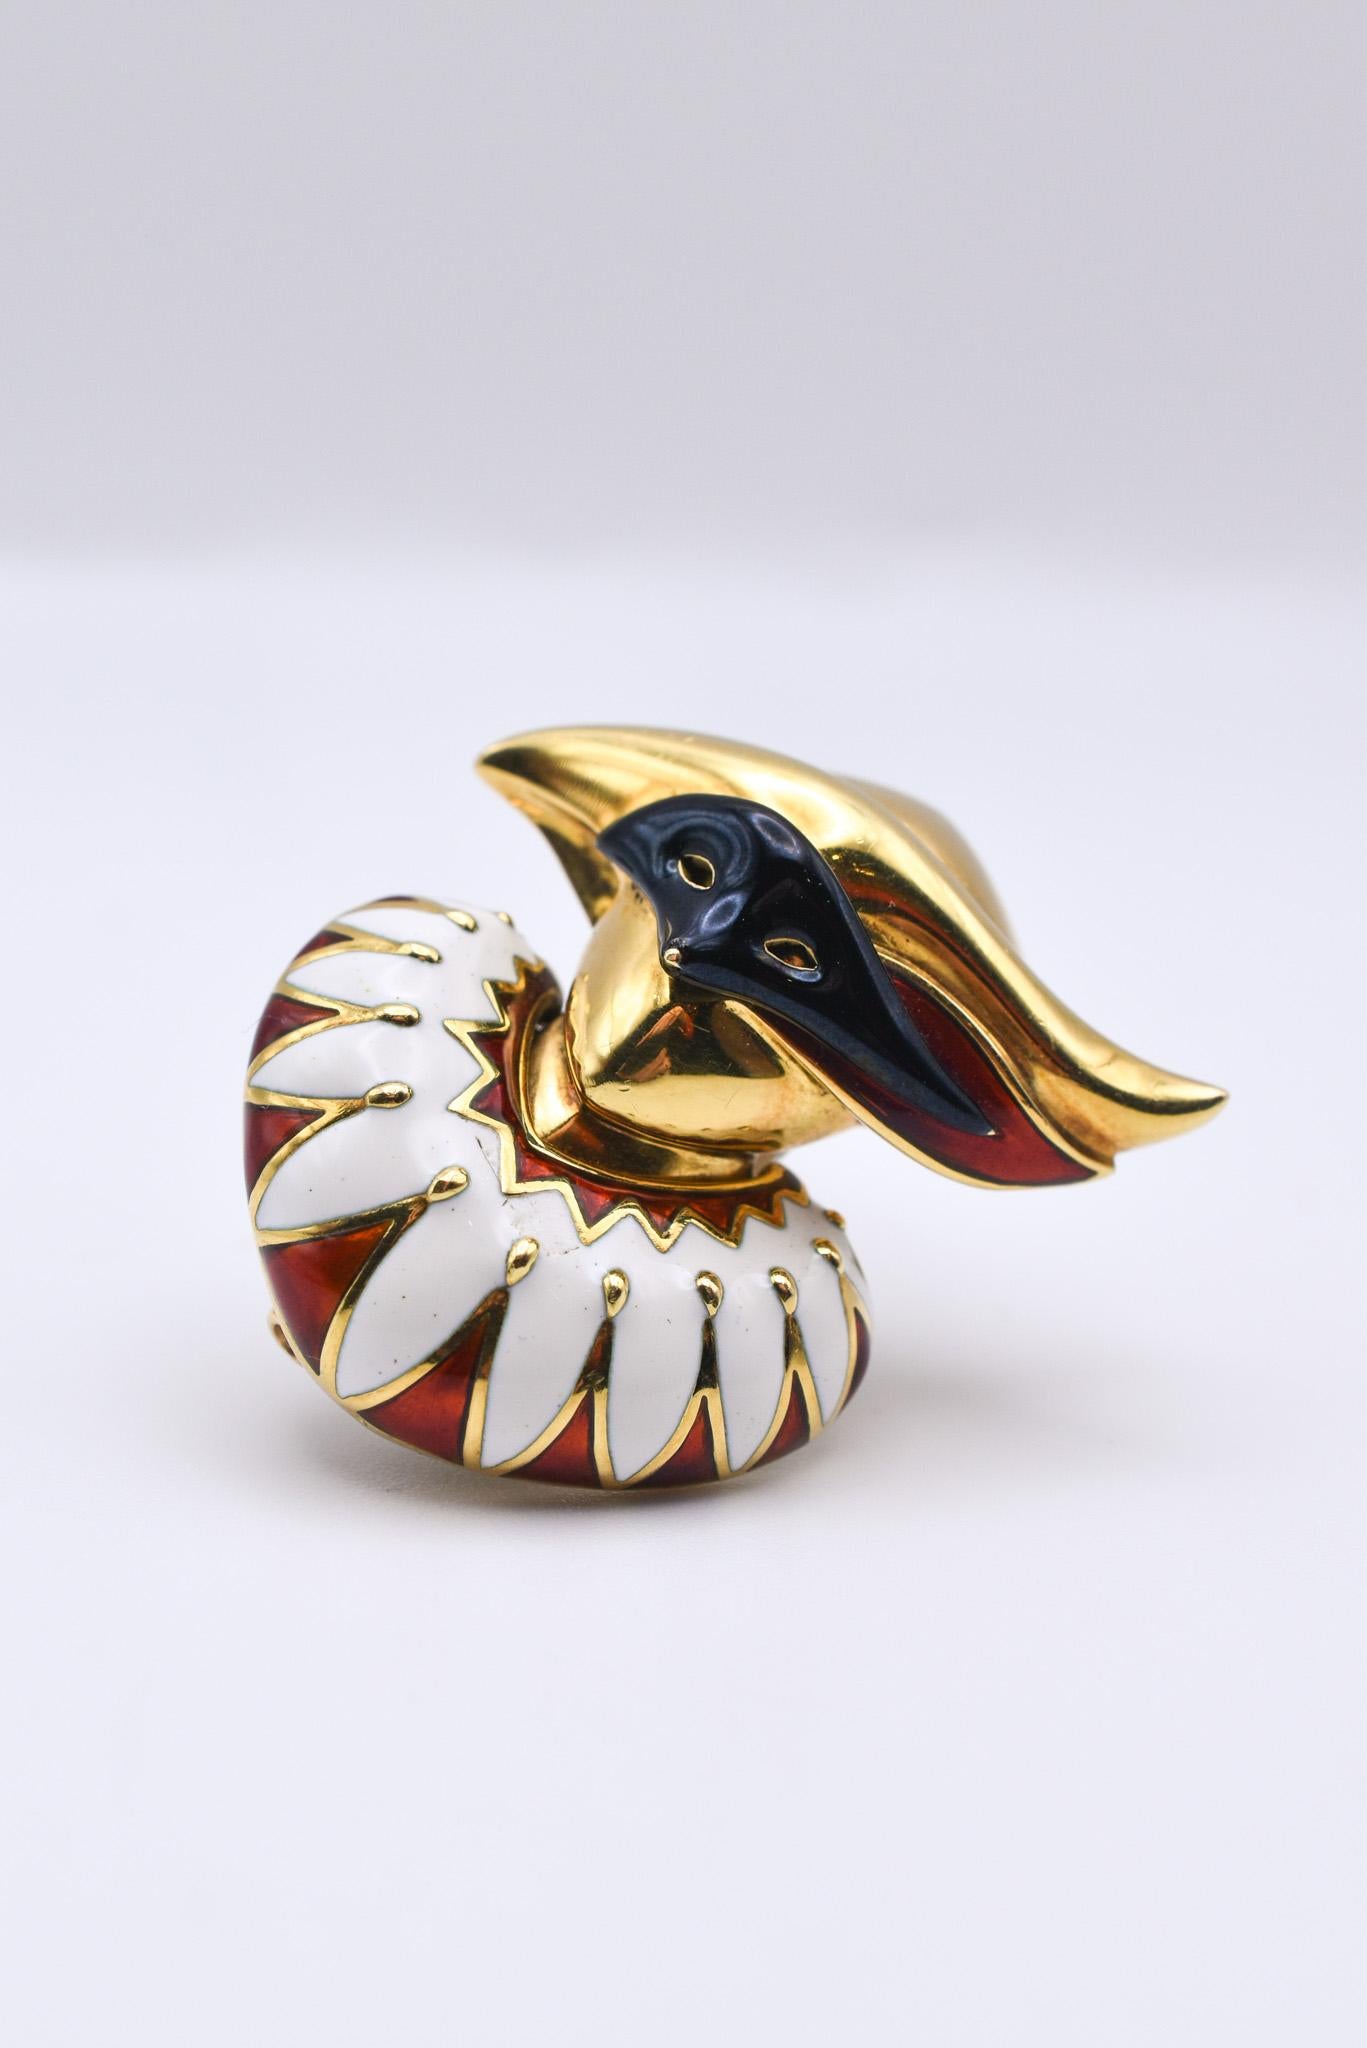 An exquisite Mauboussin Arlequin Enamel and 18k Yellow Gold Brooch. 
Made in France, circa 1960.
